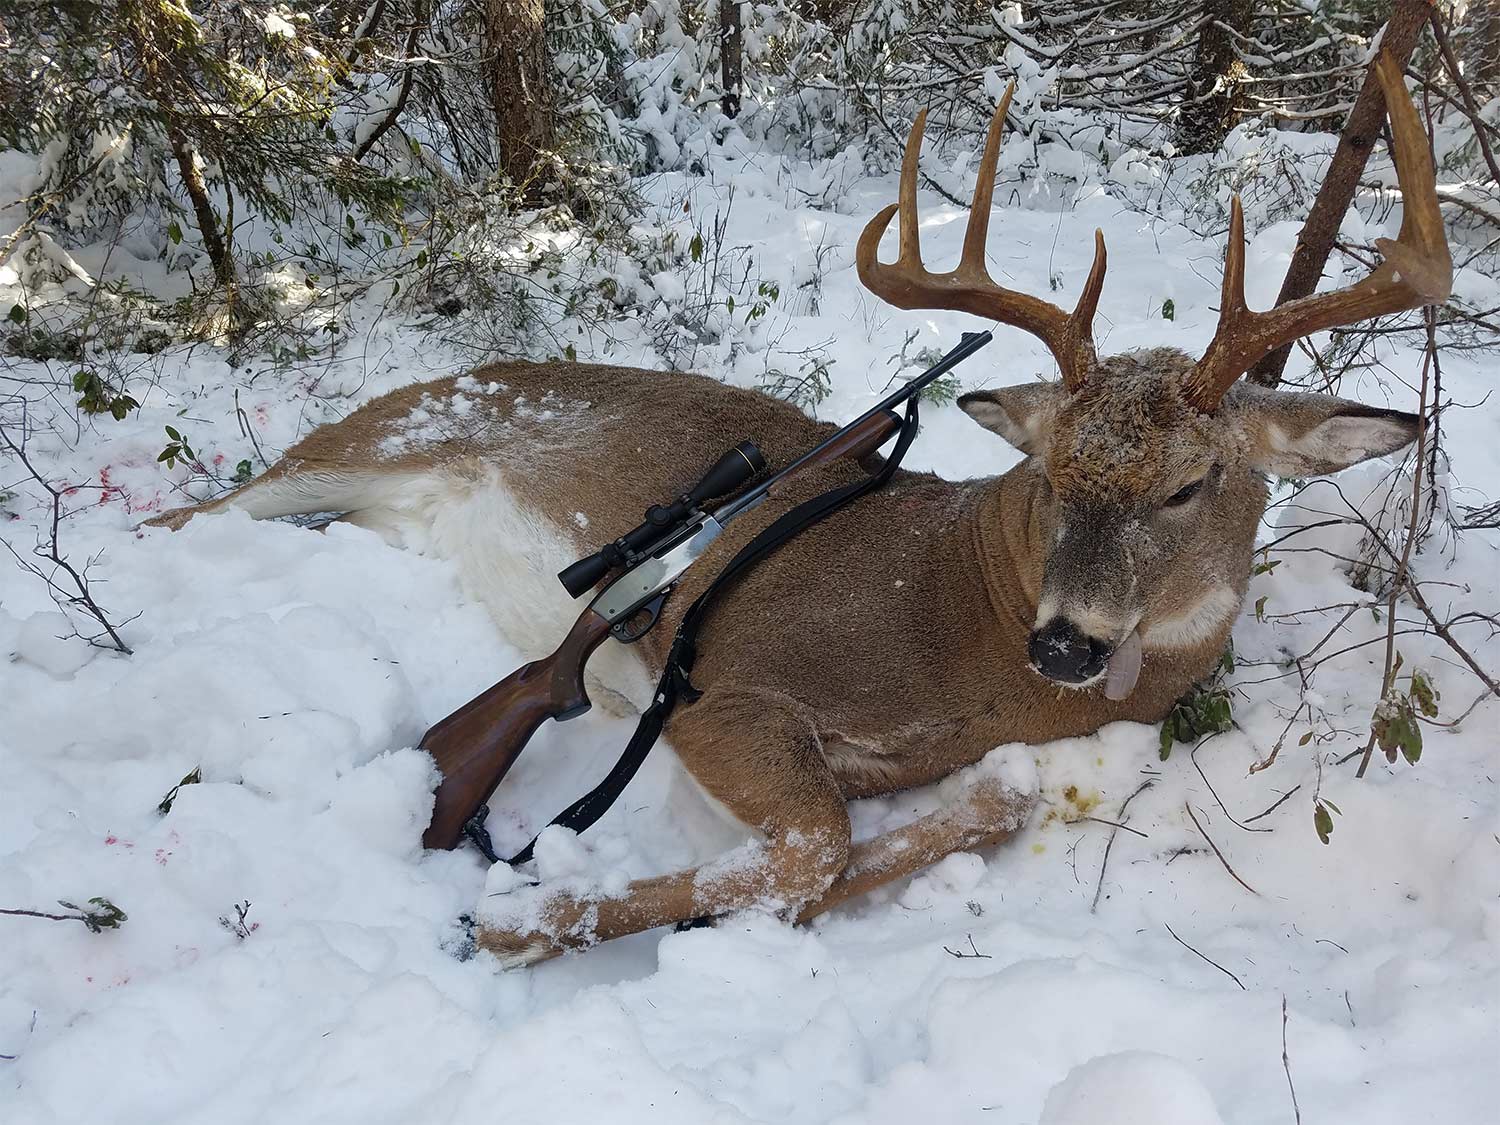 A whitetail buck lays dead in the snow while a rifle is propped against it.